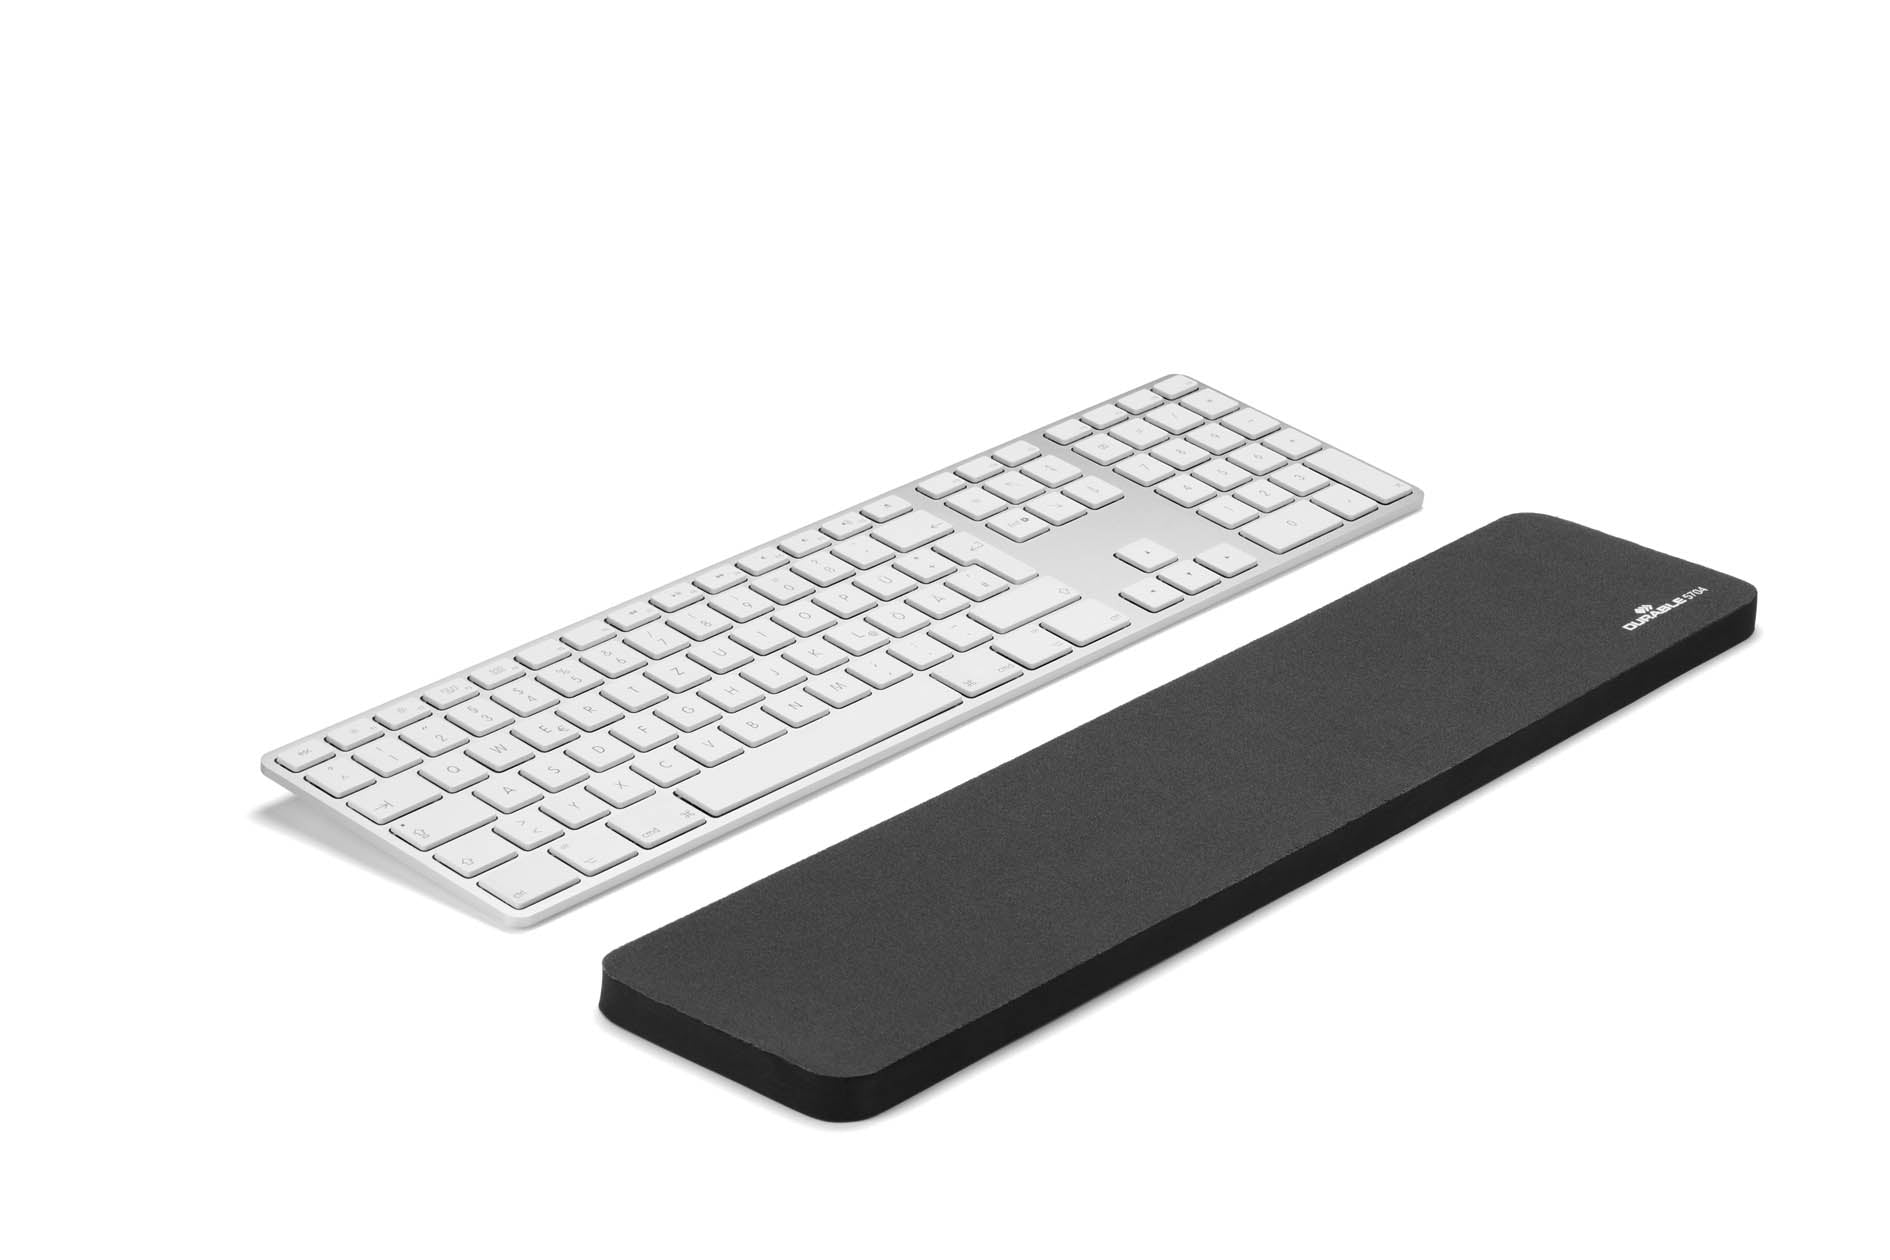 Mouse Pads & Wrist Supports